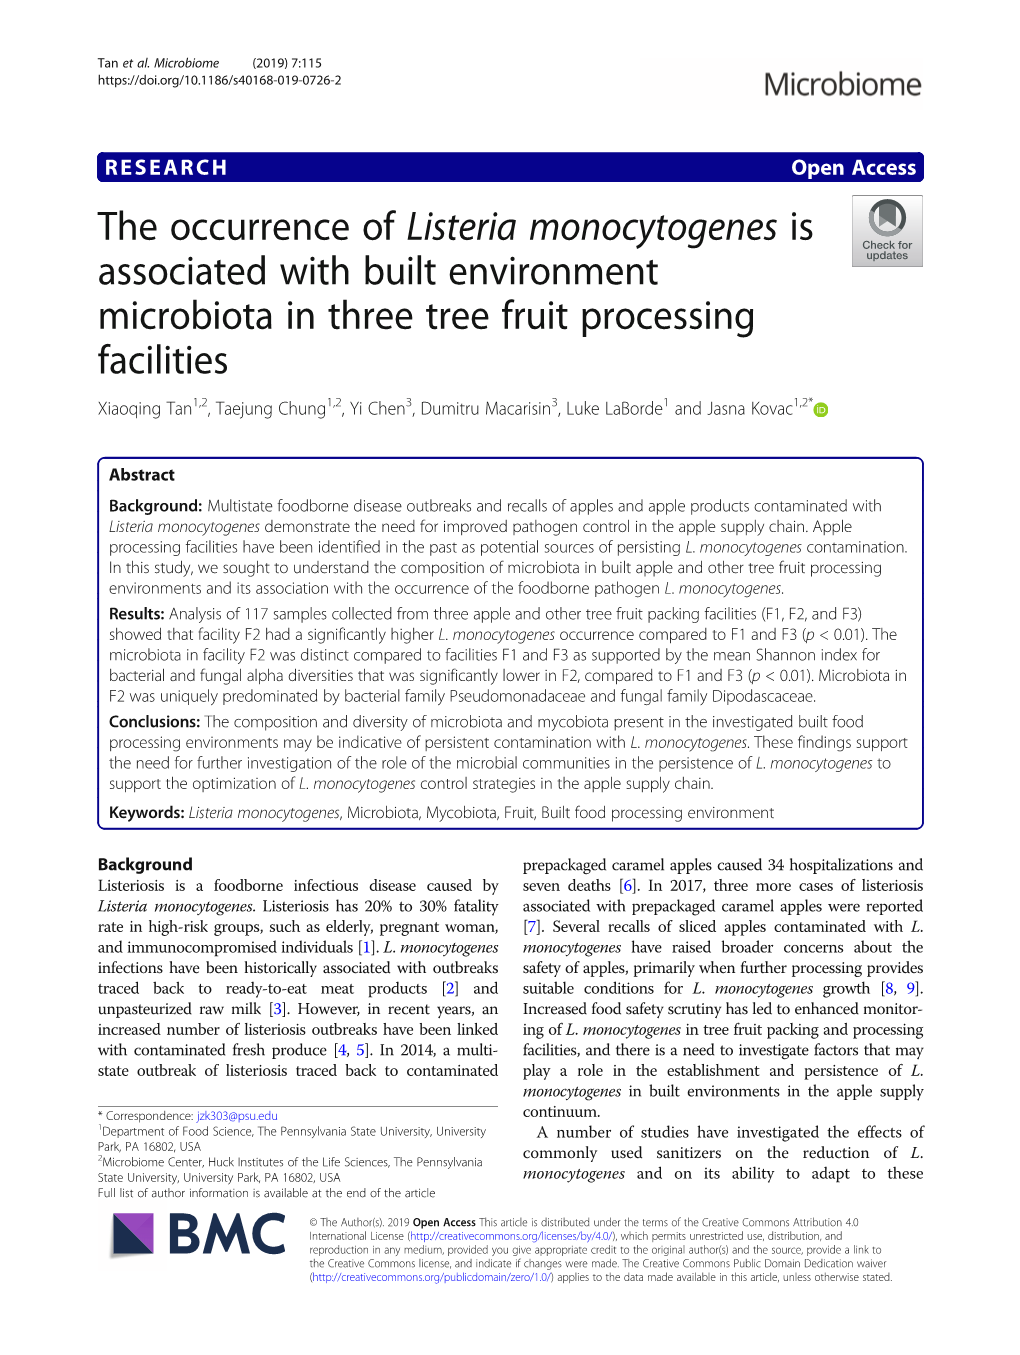 The Occurrence of Listeria Monocytogenes Is Associated With